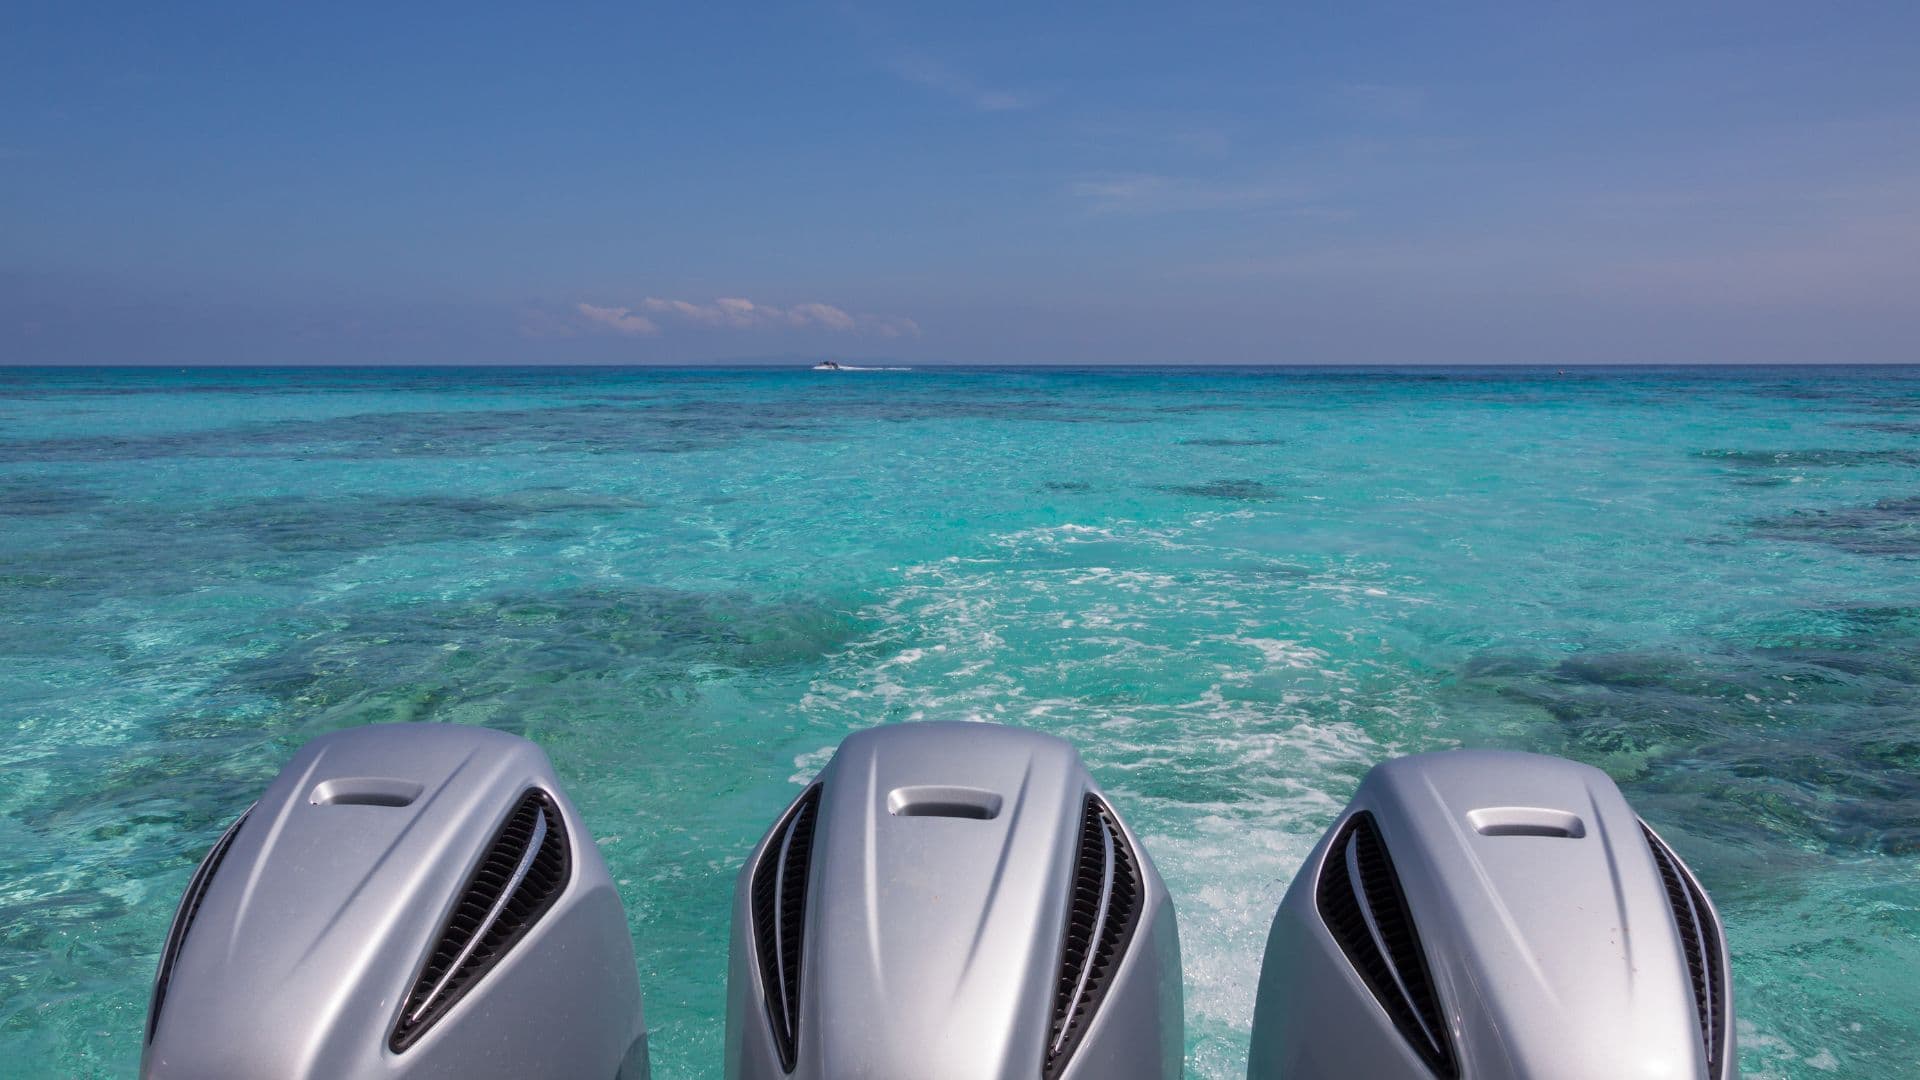 An image of outboard engines on a boat on a gorgeous clear day.